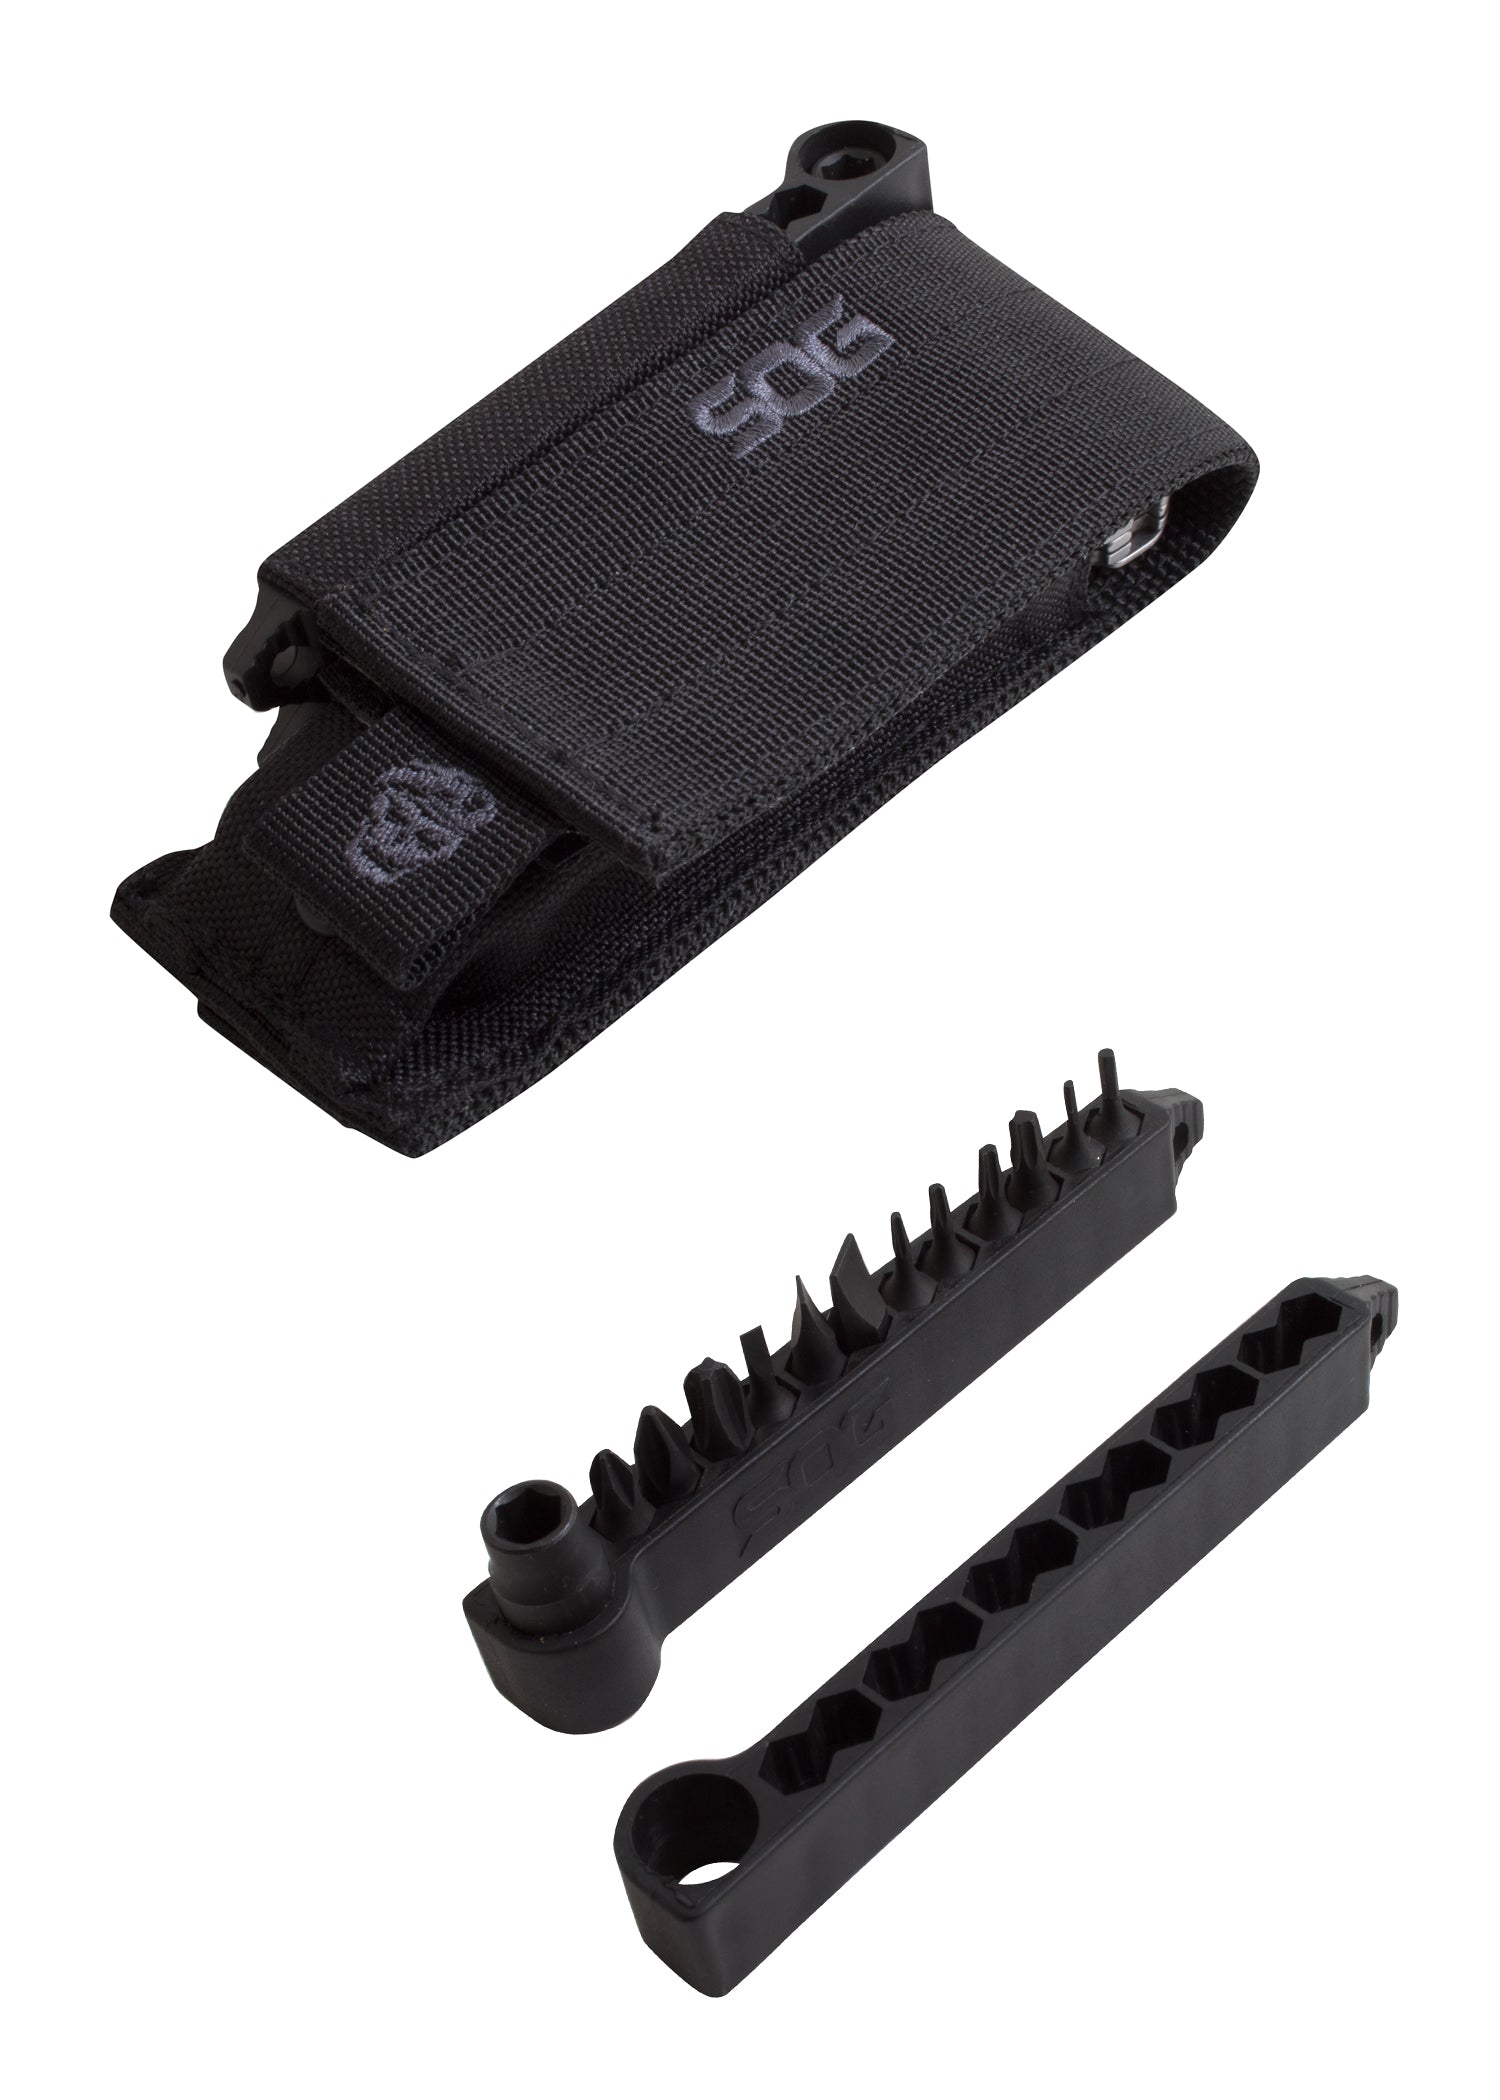 Outil multi-fonctions Poweraccess Deluxe - SOG-T.A DEFENSE